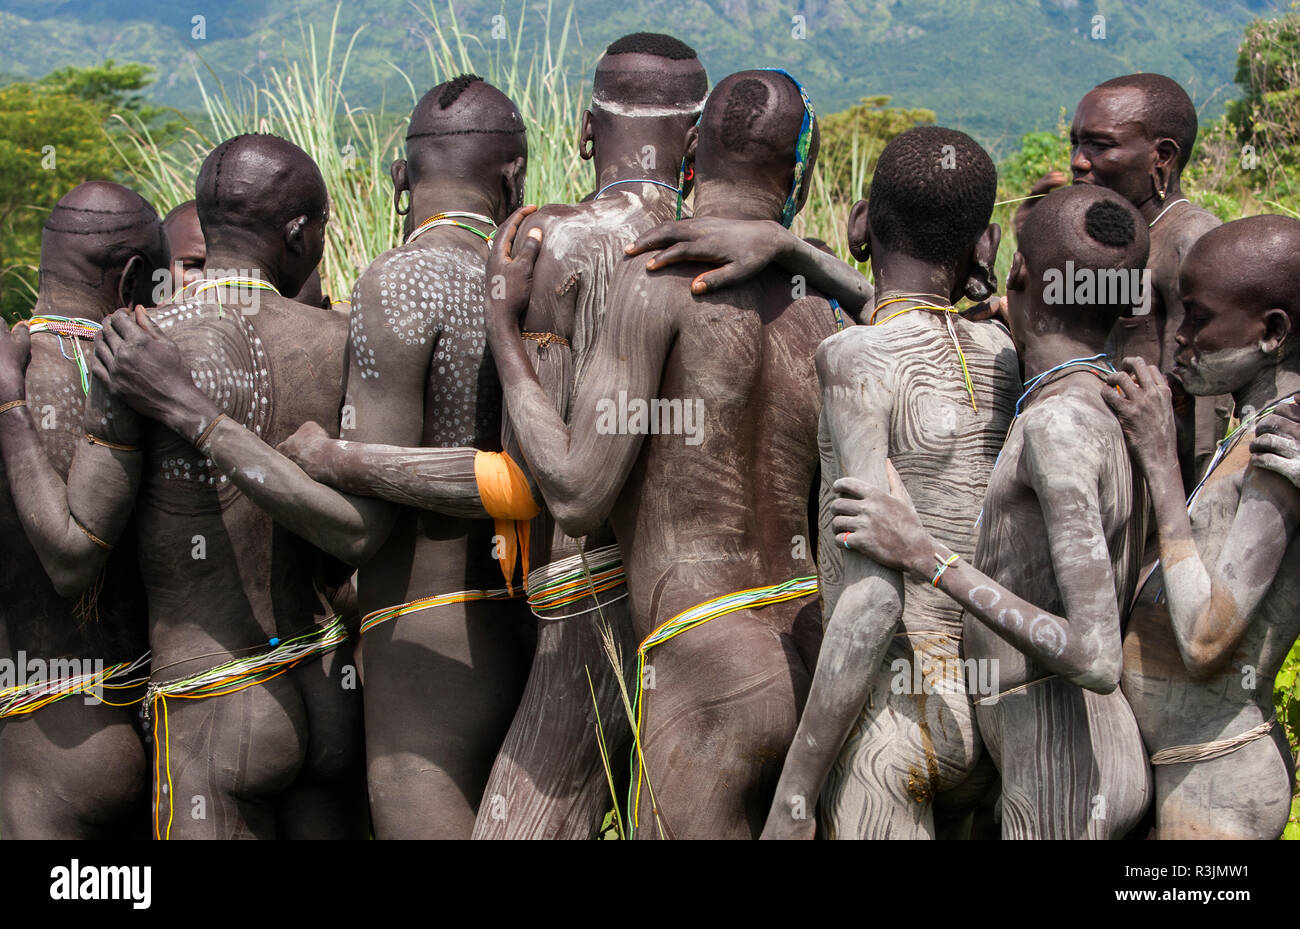 Surma tribesmen preparing for 'Donga,' a traditional stick fighting event, Omo River Valley, Ethiopia. Stock Photo